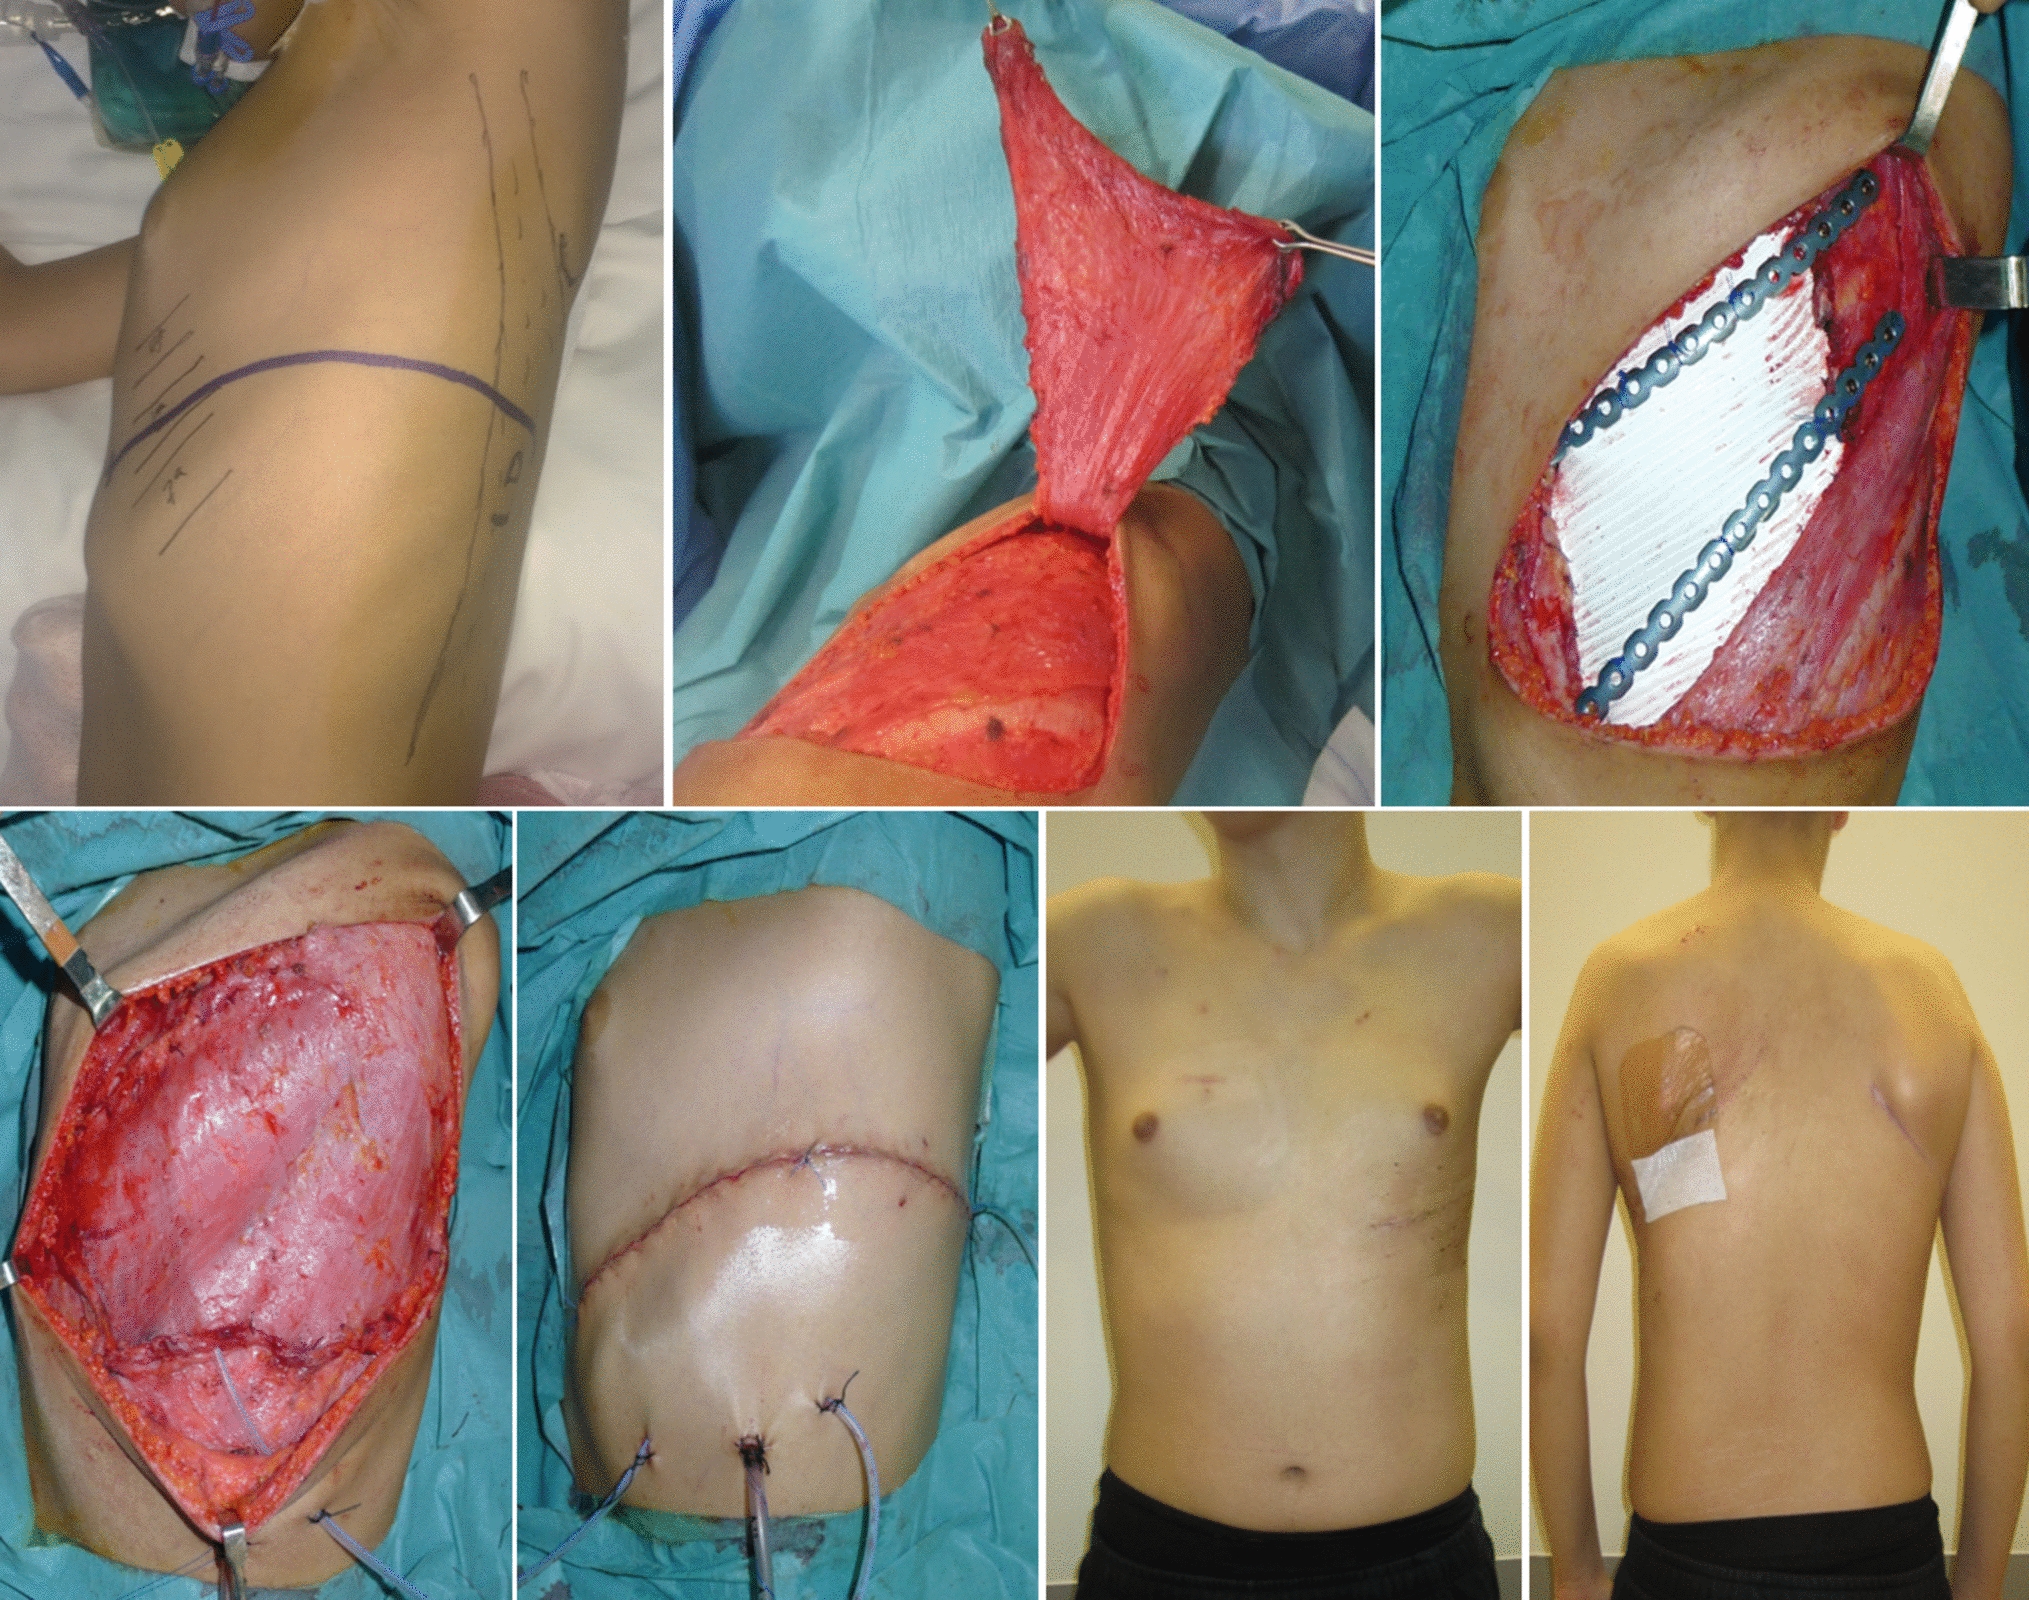 Use of pedicled flaps after oncologic resections in pediatric patients